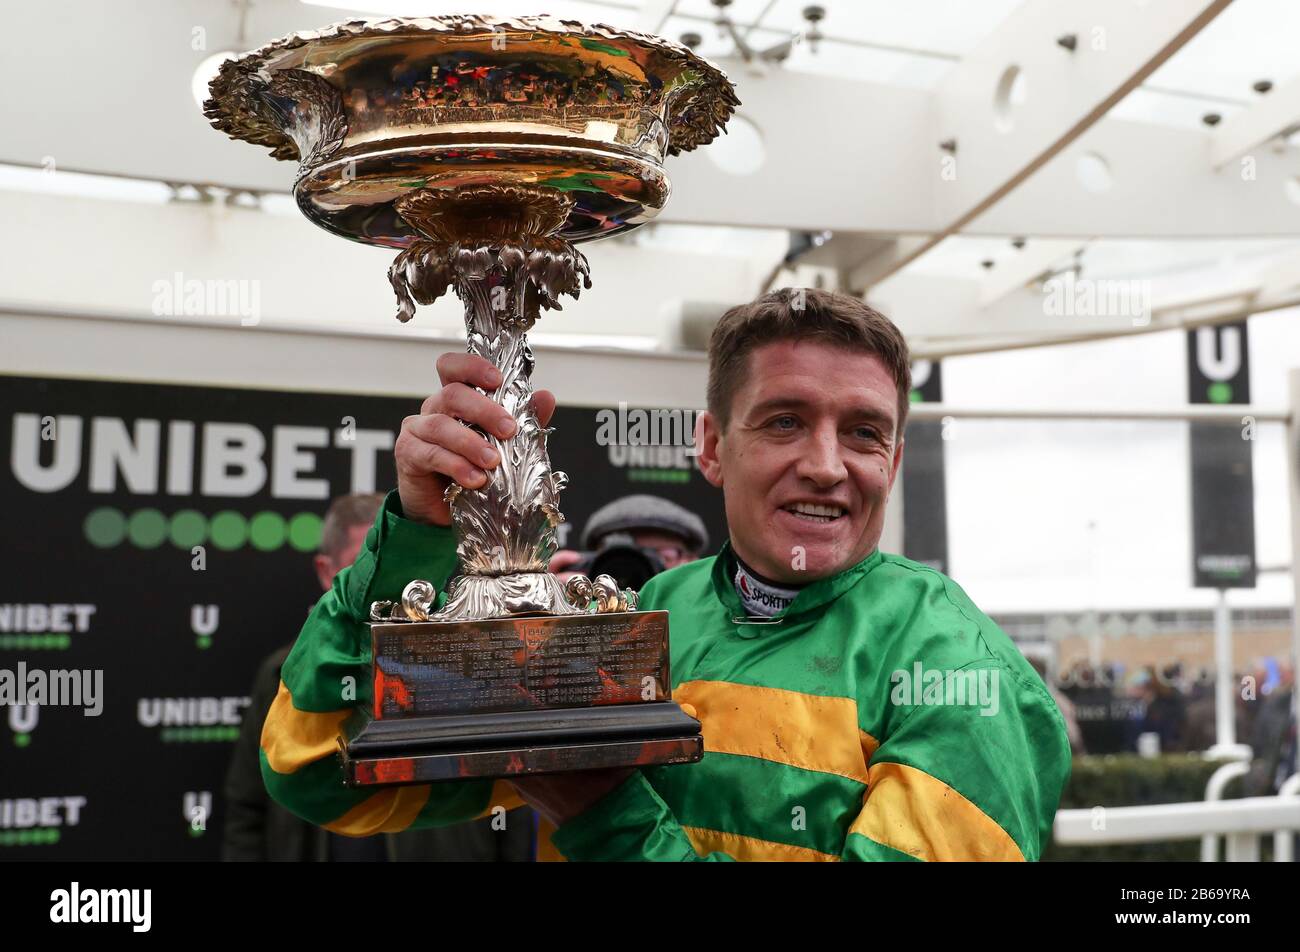 Winning Jockey of of Epatante, Barry Geraghty following victory in the Unibet Champion Hurdle Challenge Trophy on day one of the Cheltenham Festival at Cheltenham Racecourse, Cheltenham. Stock Photo